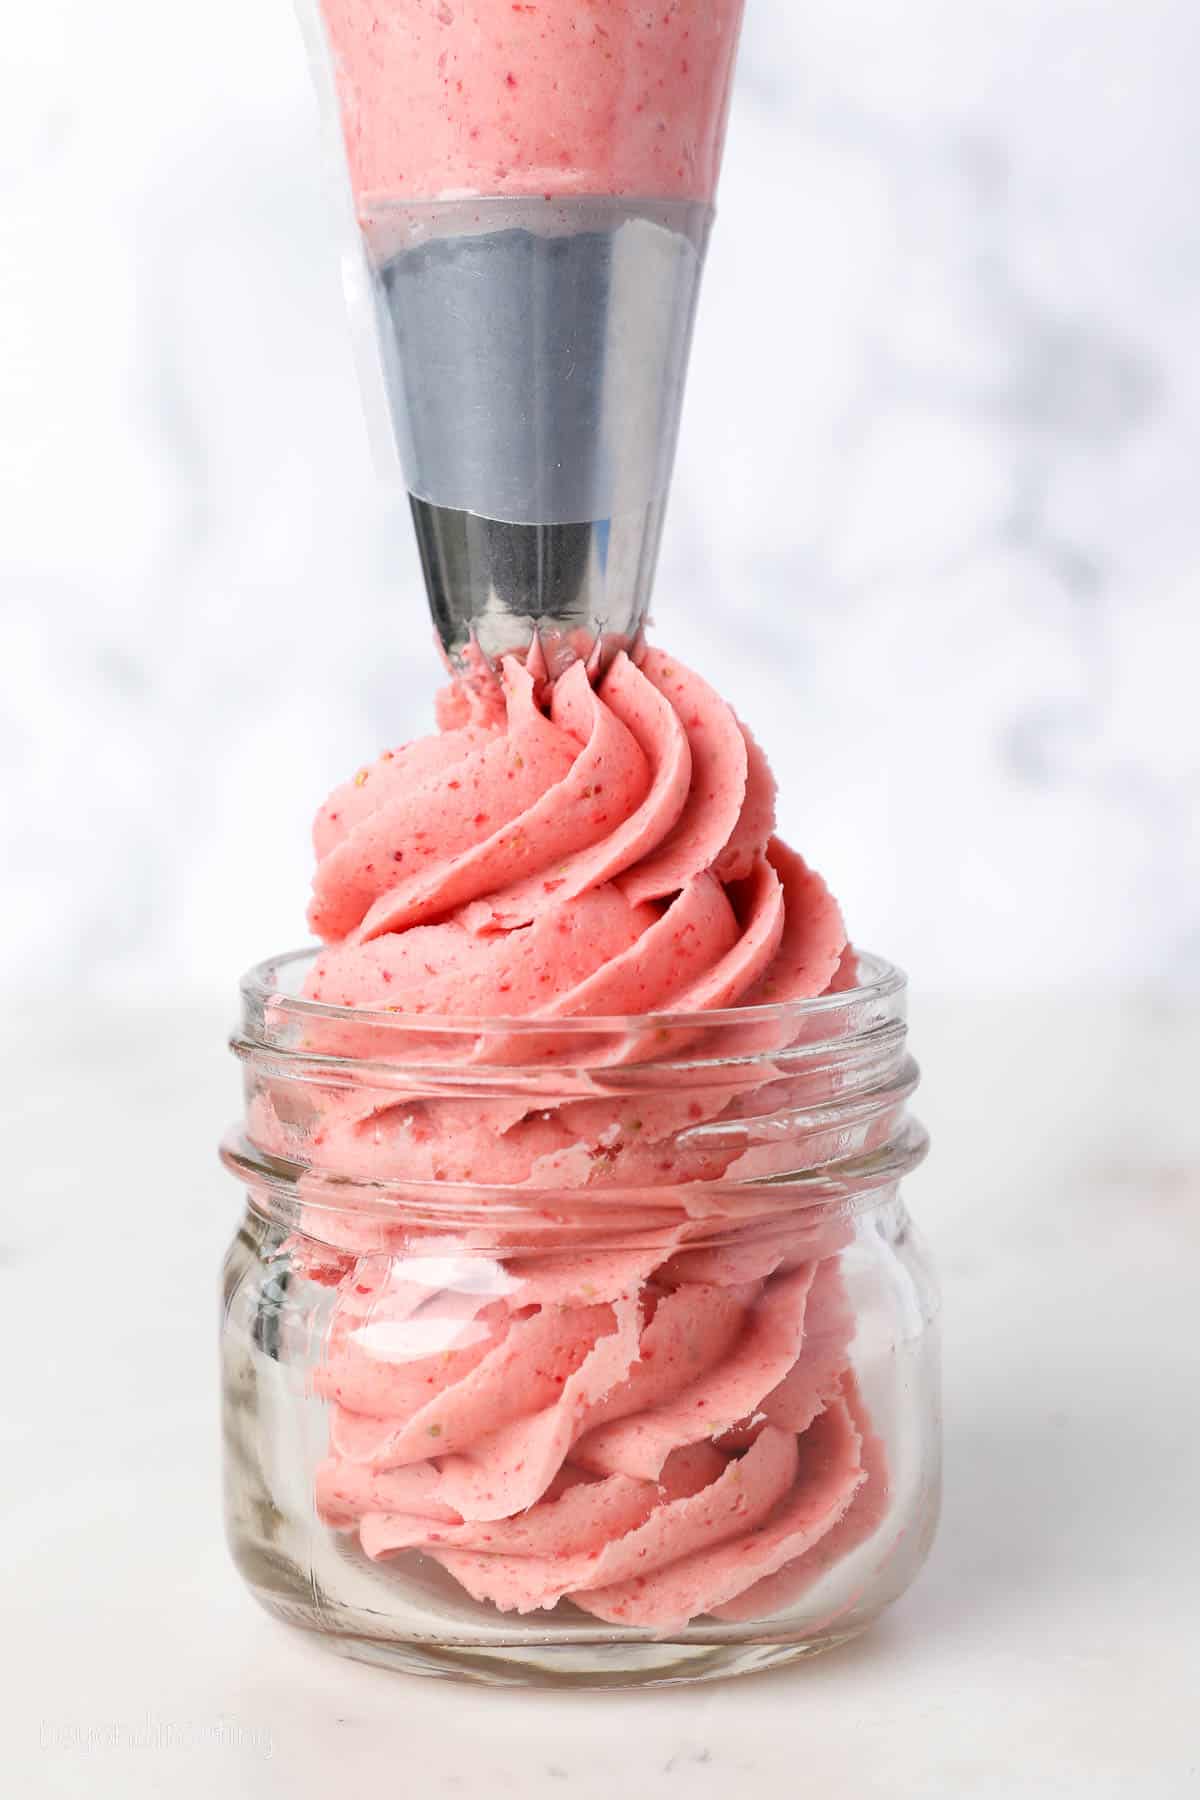 A piping tip swirls strawberry frosting into a glass jar.